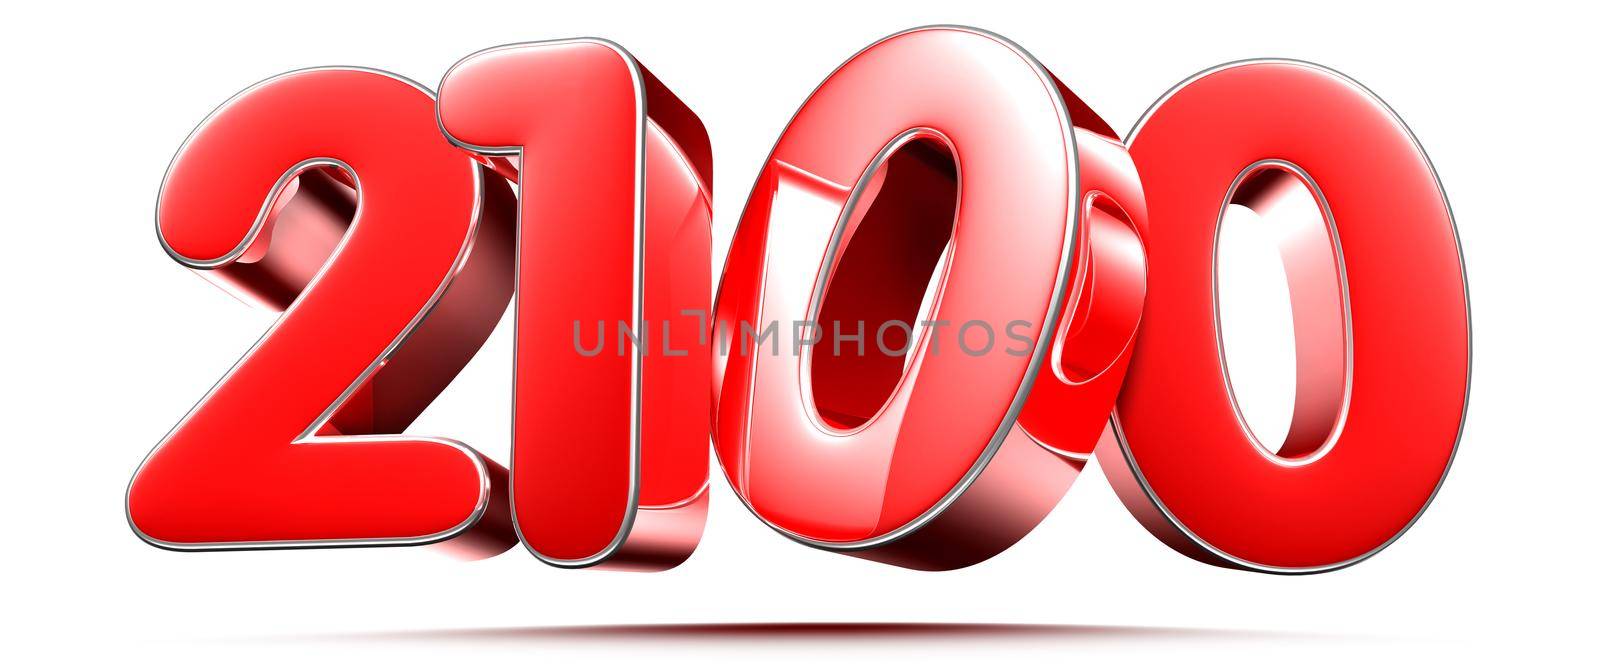 Rounded red numbers 2100 on white background 3D illustration with clipping path